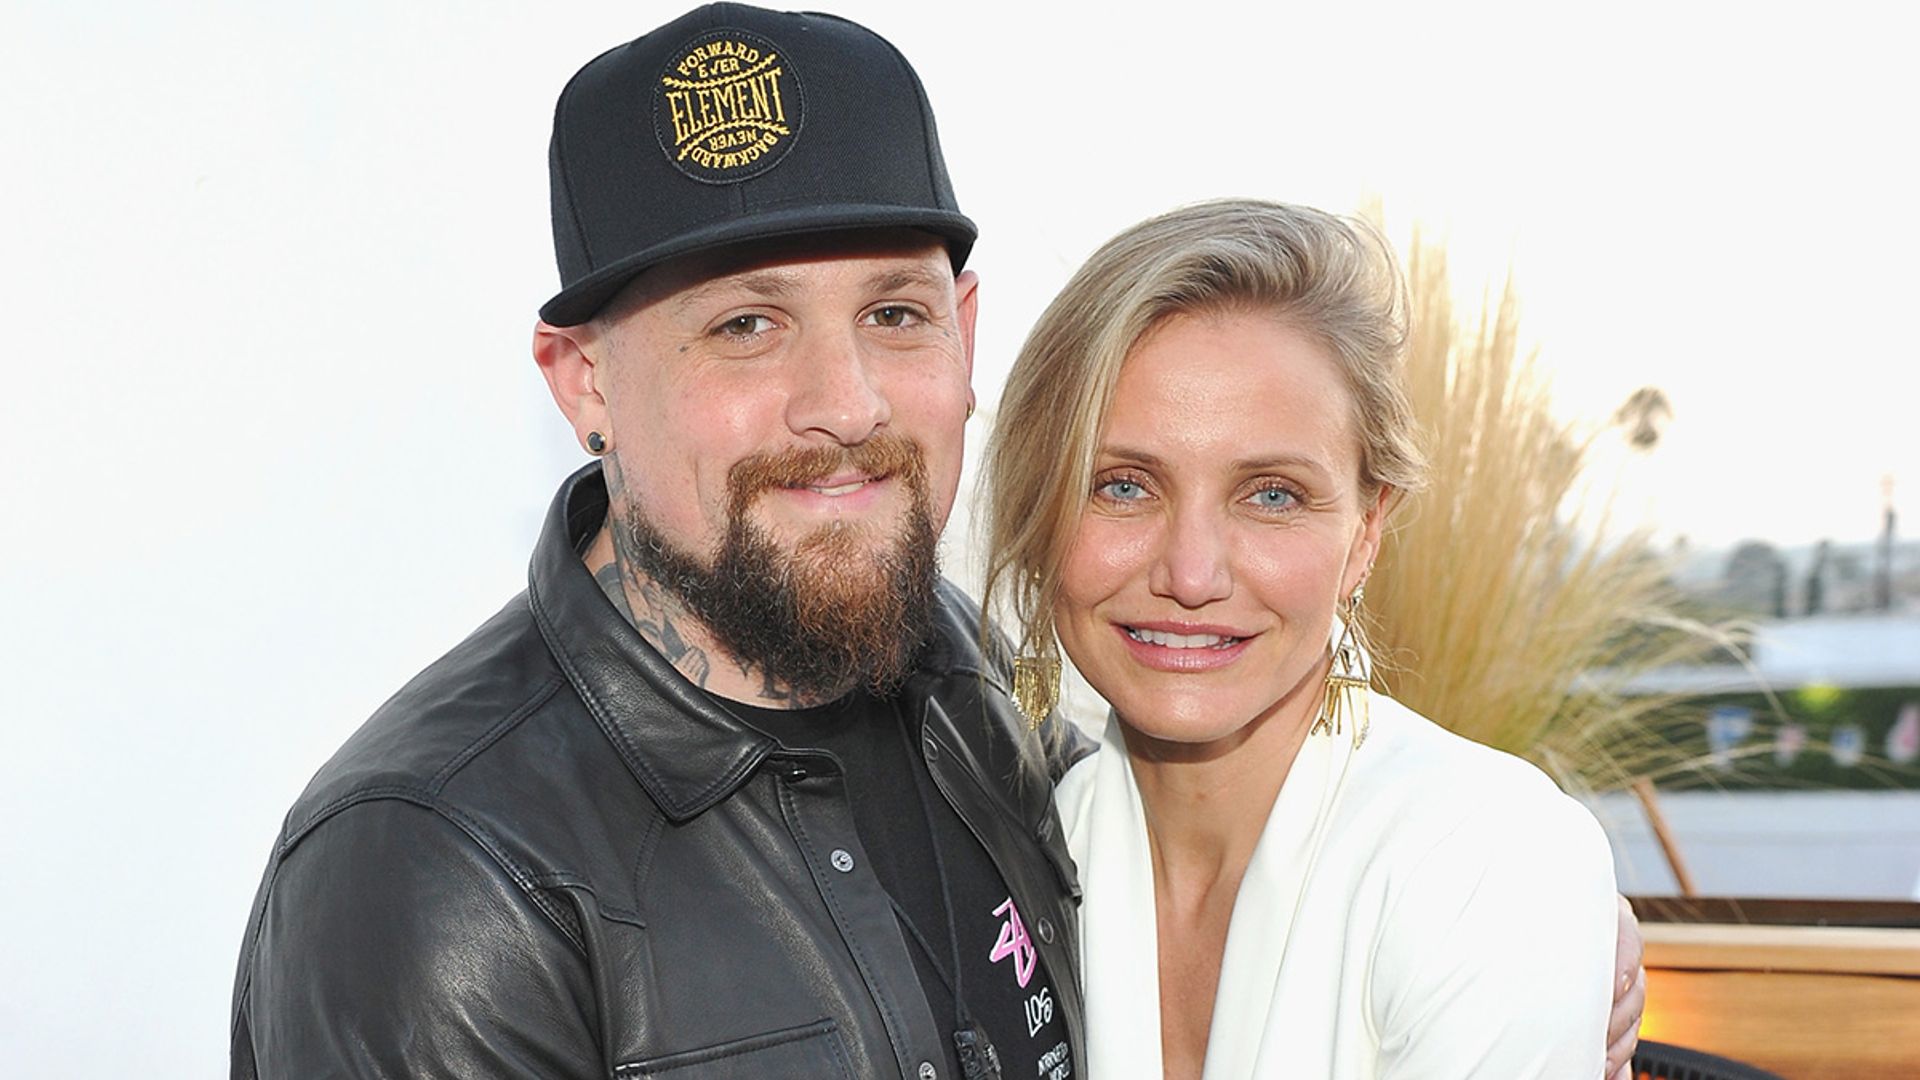 Cameron Diaz's husband celebrates her first Mother's Day in the sweetest way